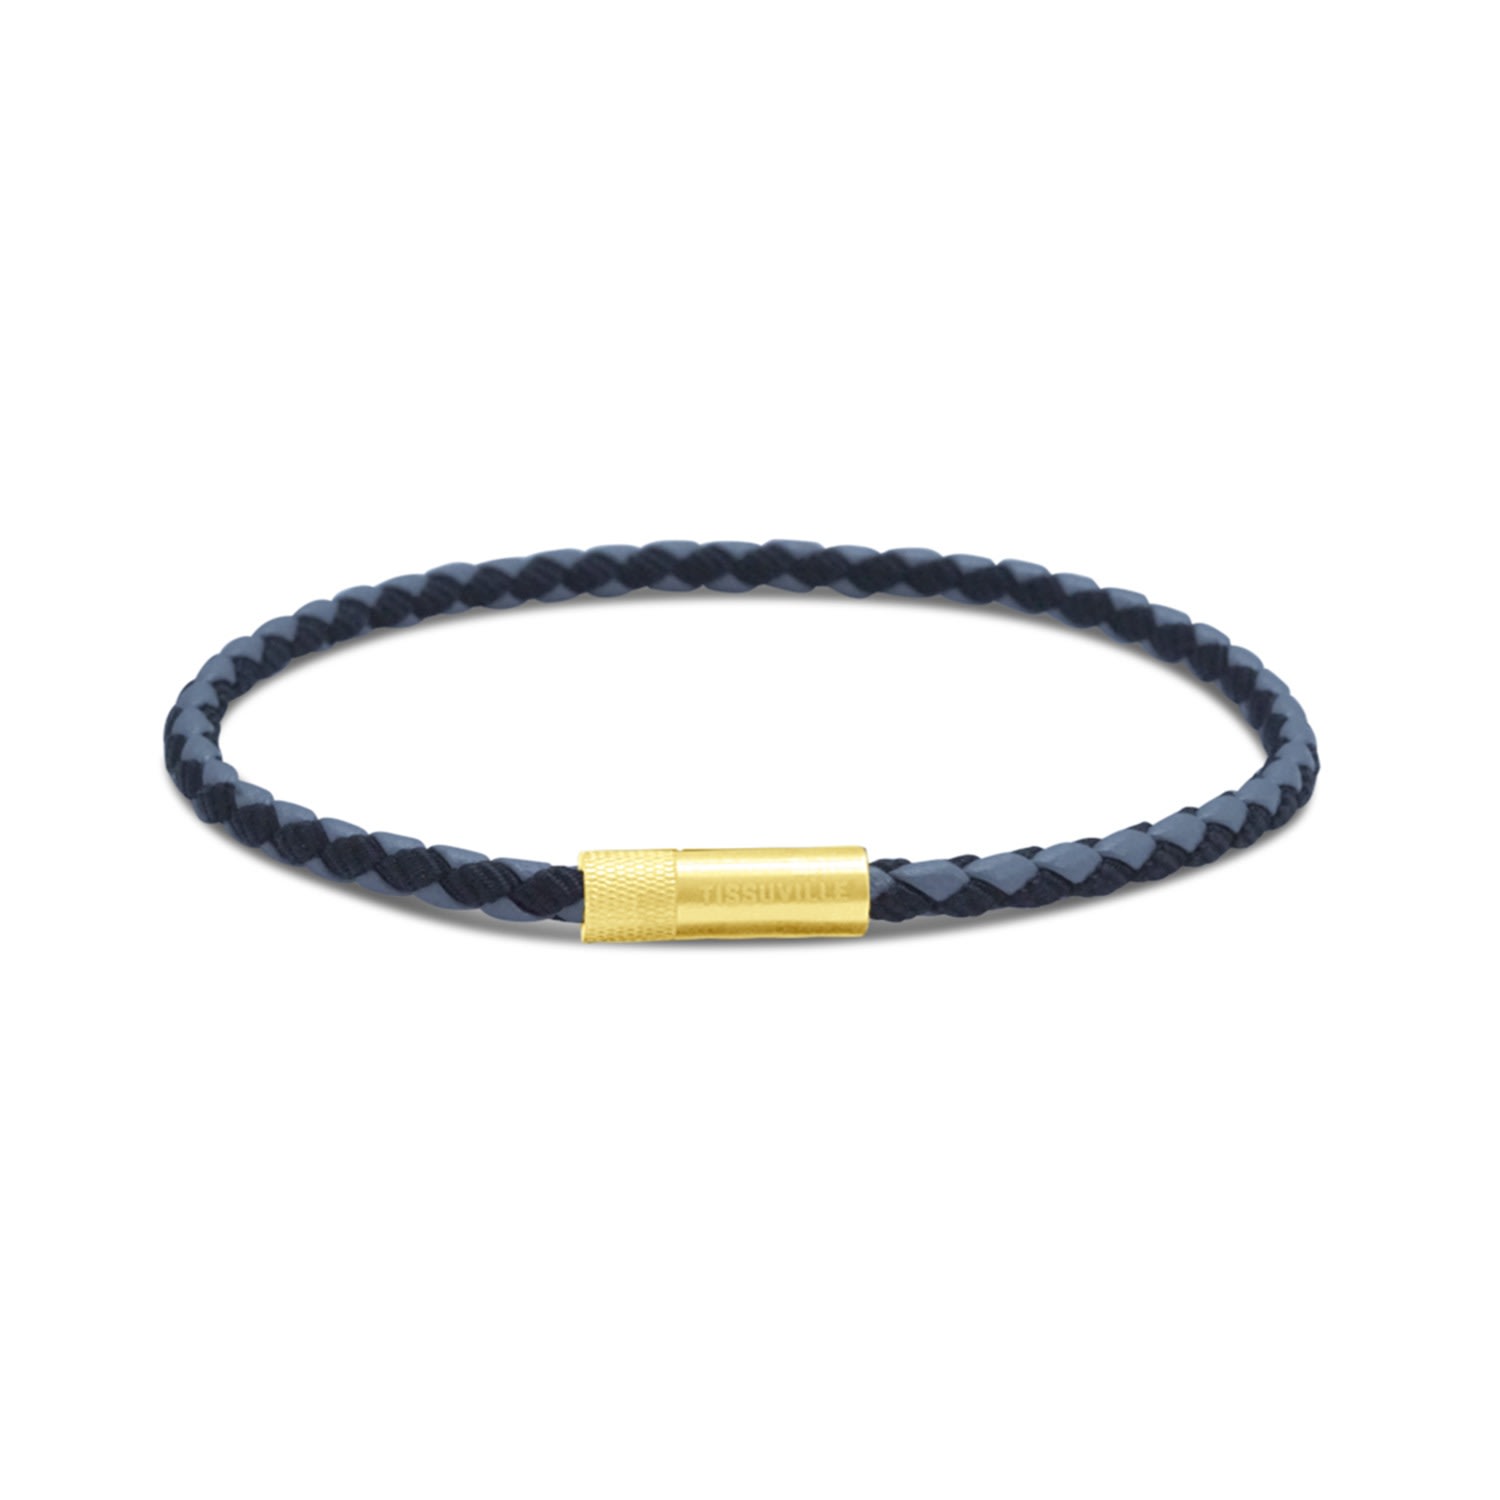 Men's Black Grey Braided Leather & Silk Bracelet With Gold-Plated Hardware - Grey Tissuville